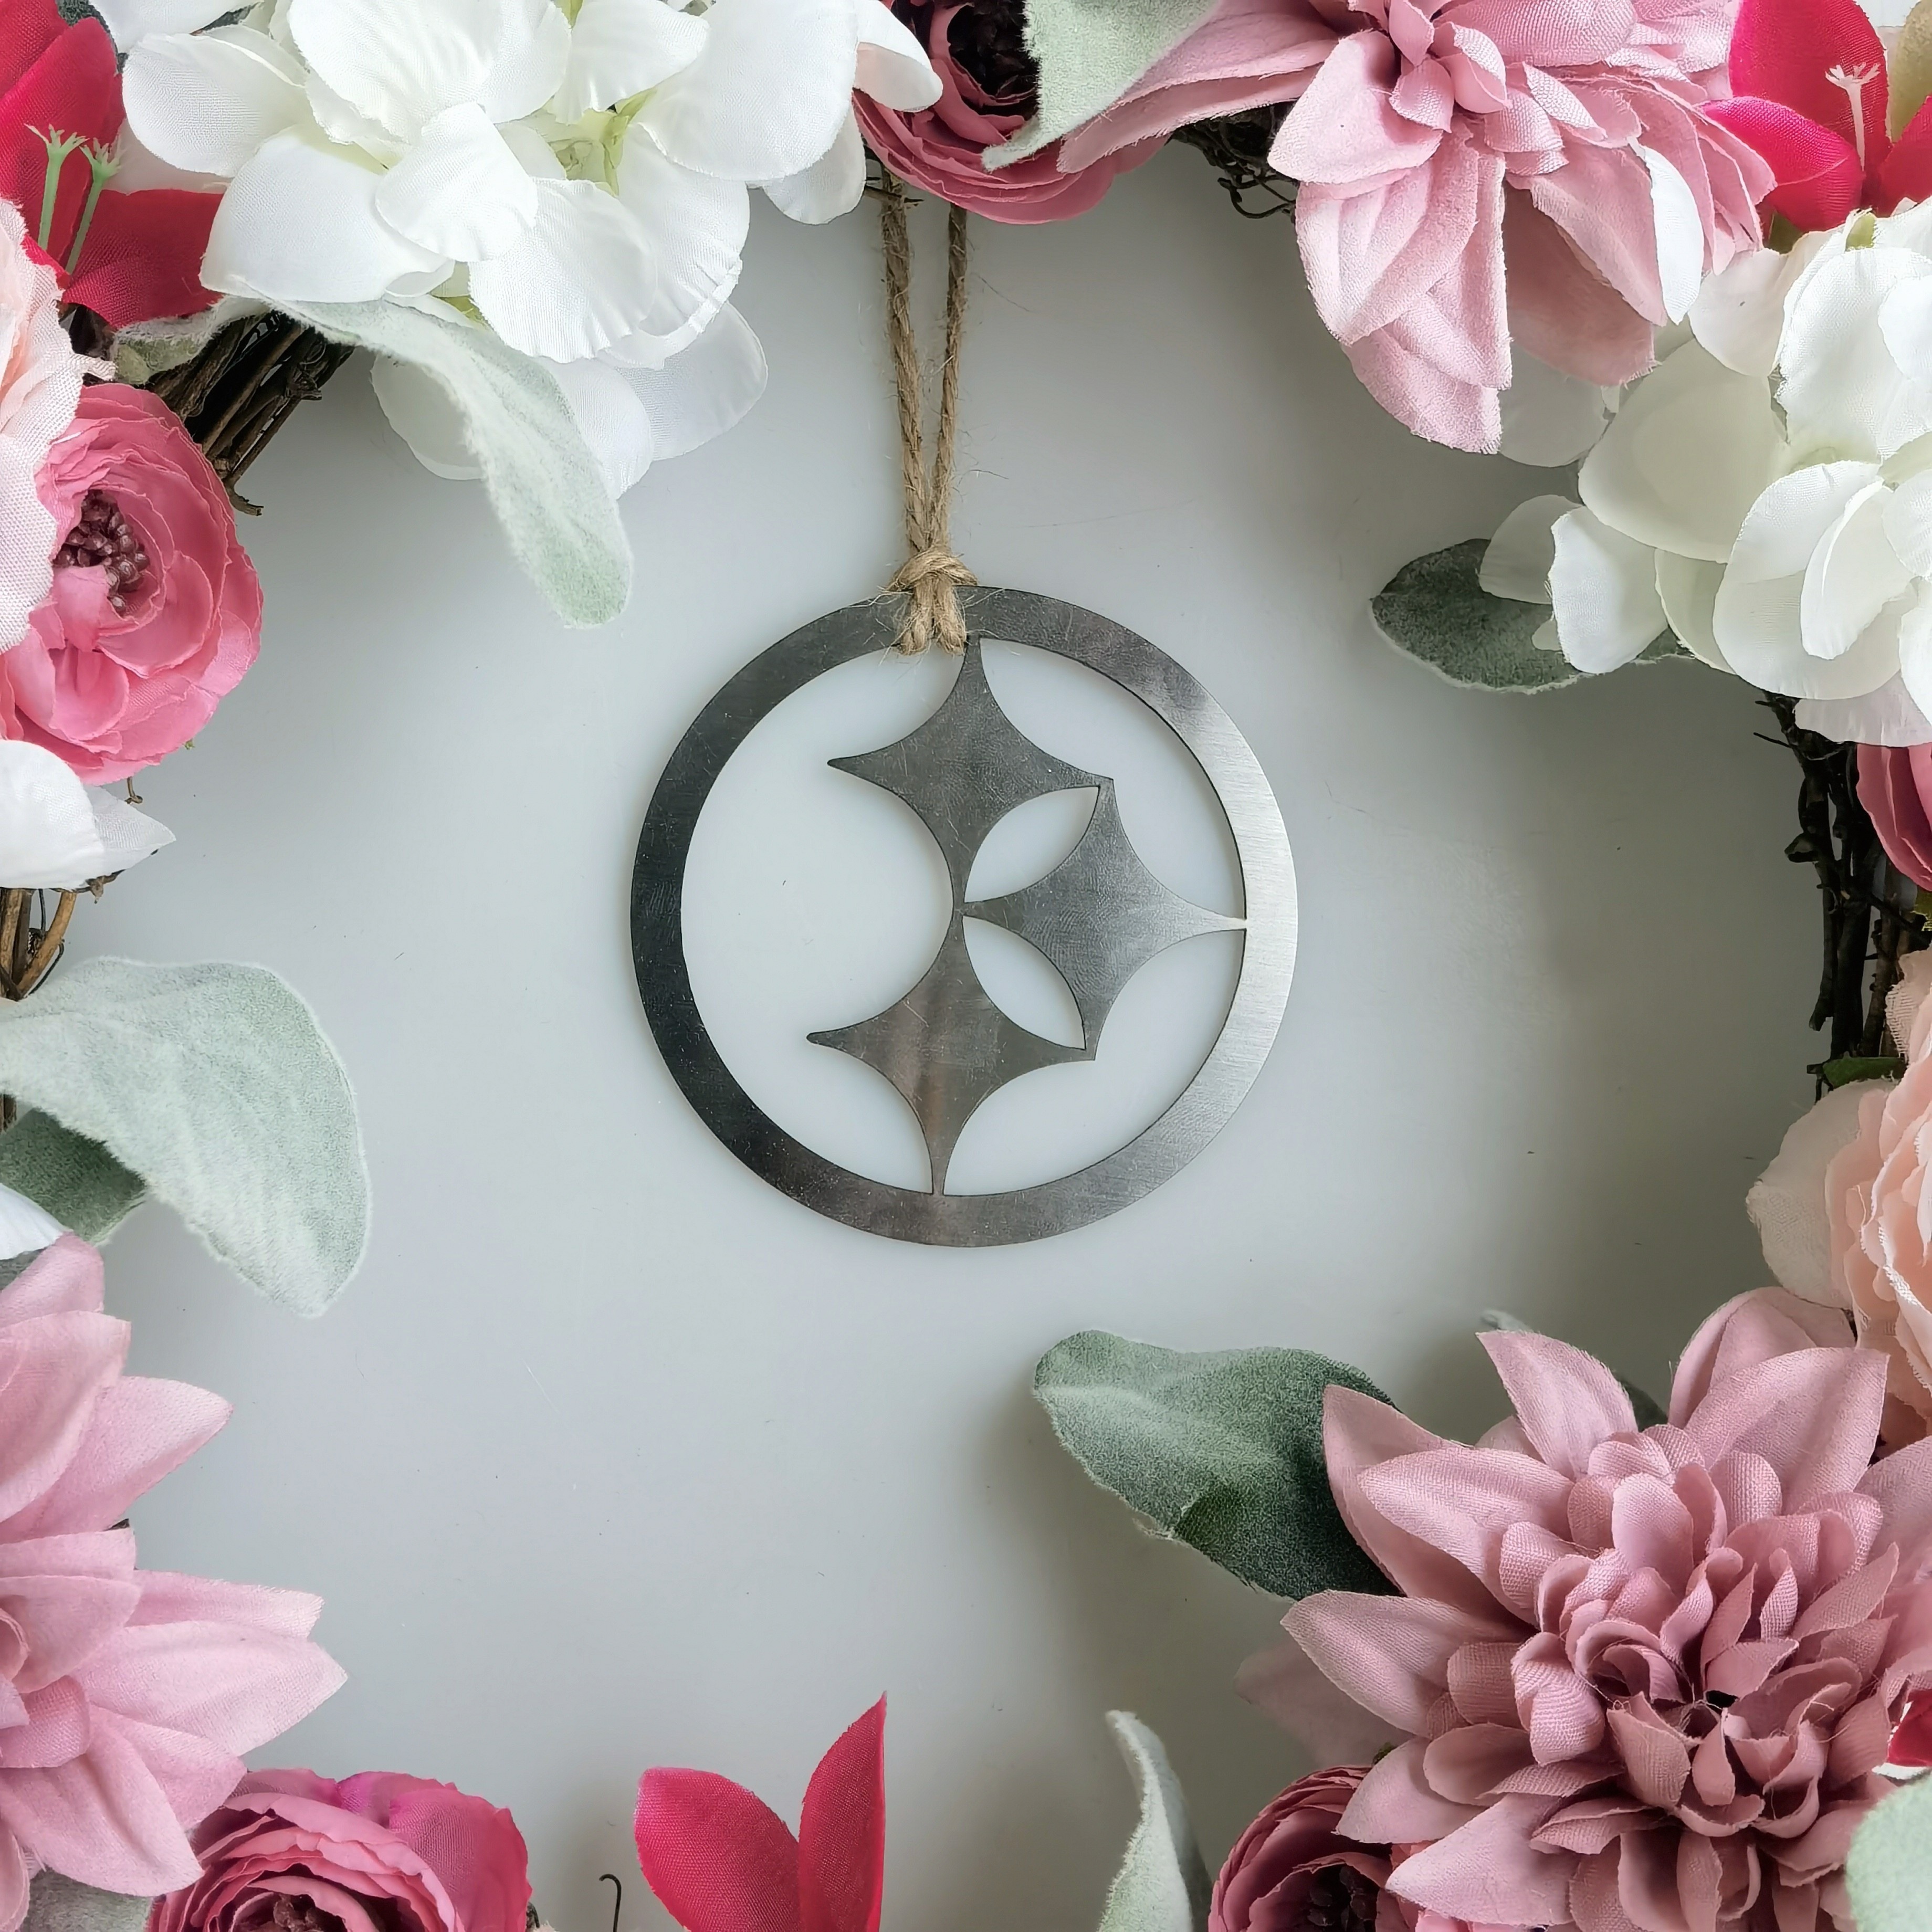 

1pc Star Shaped Metal Pendant, American Football Fans Game Time Ornament, Metal Small Hanging Ornament, For Home Room Living Room Office Decor, Valentine's Day New Year Easter Gift